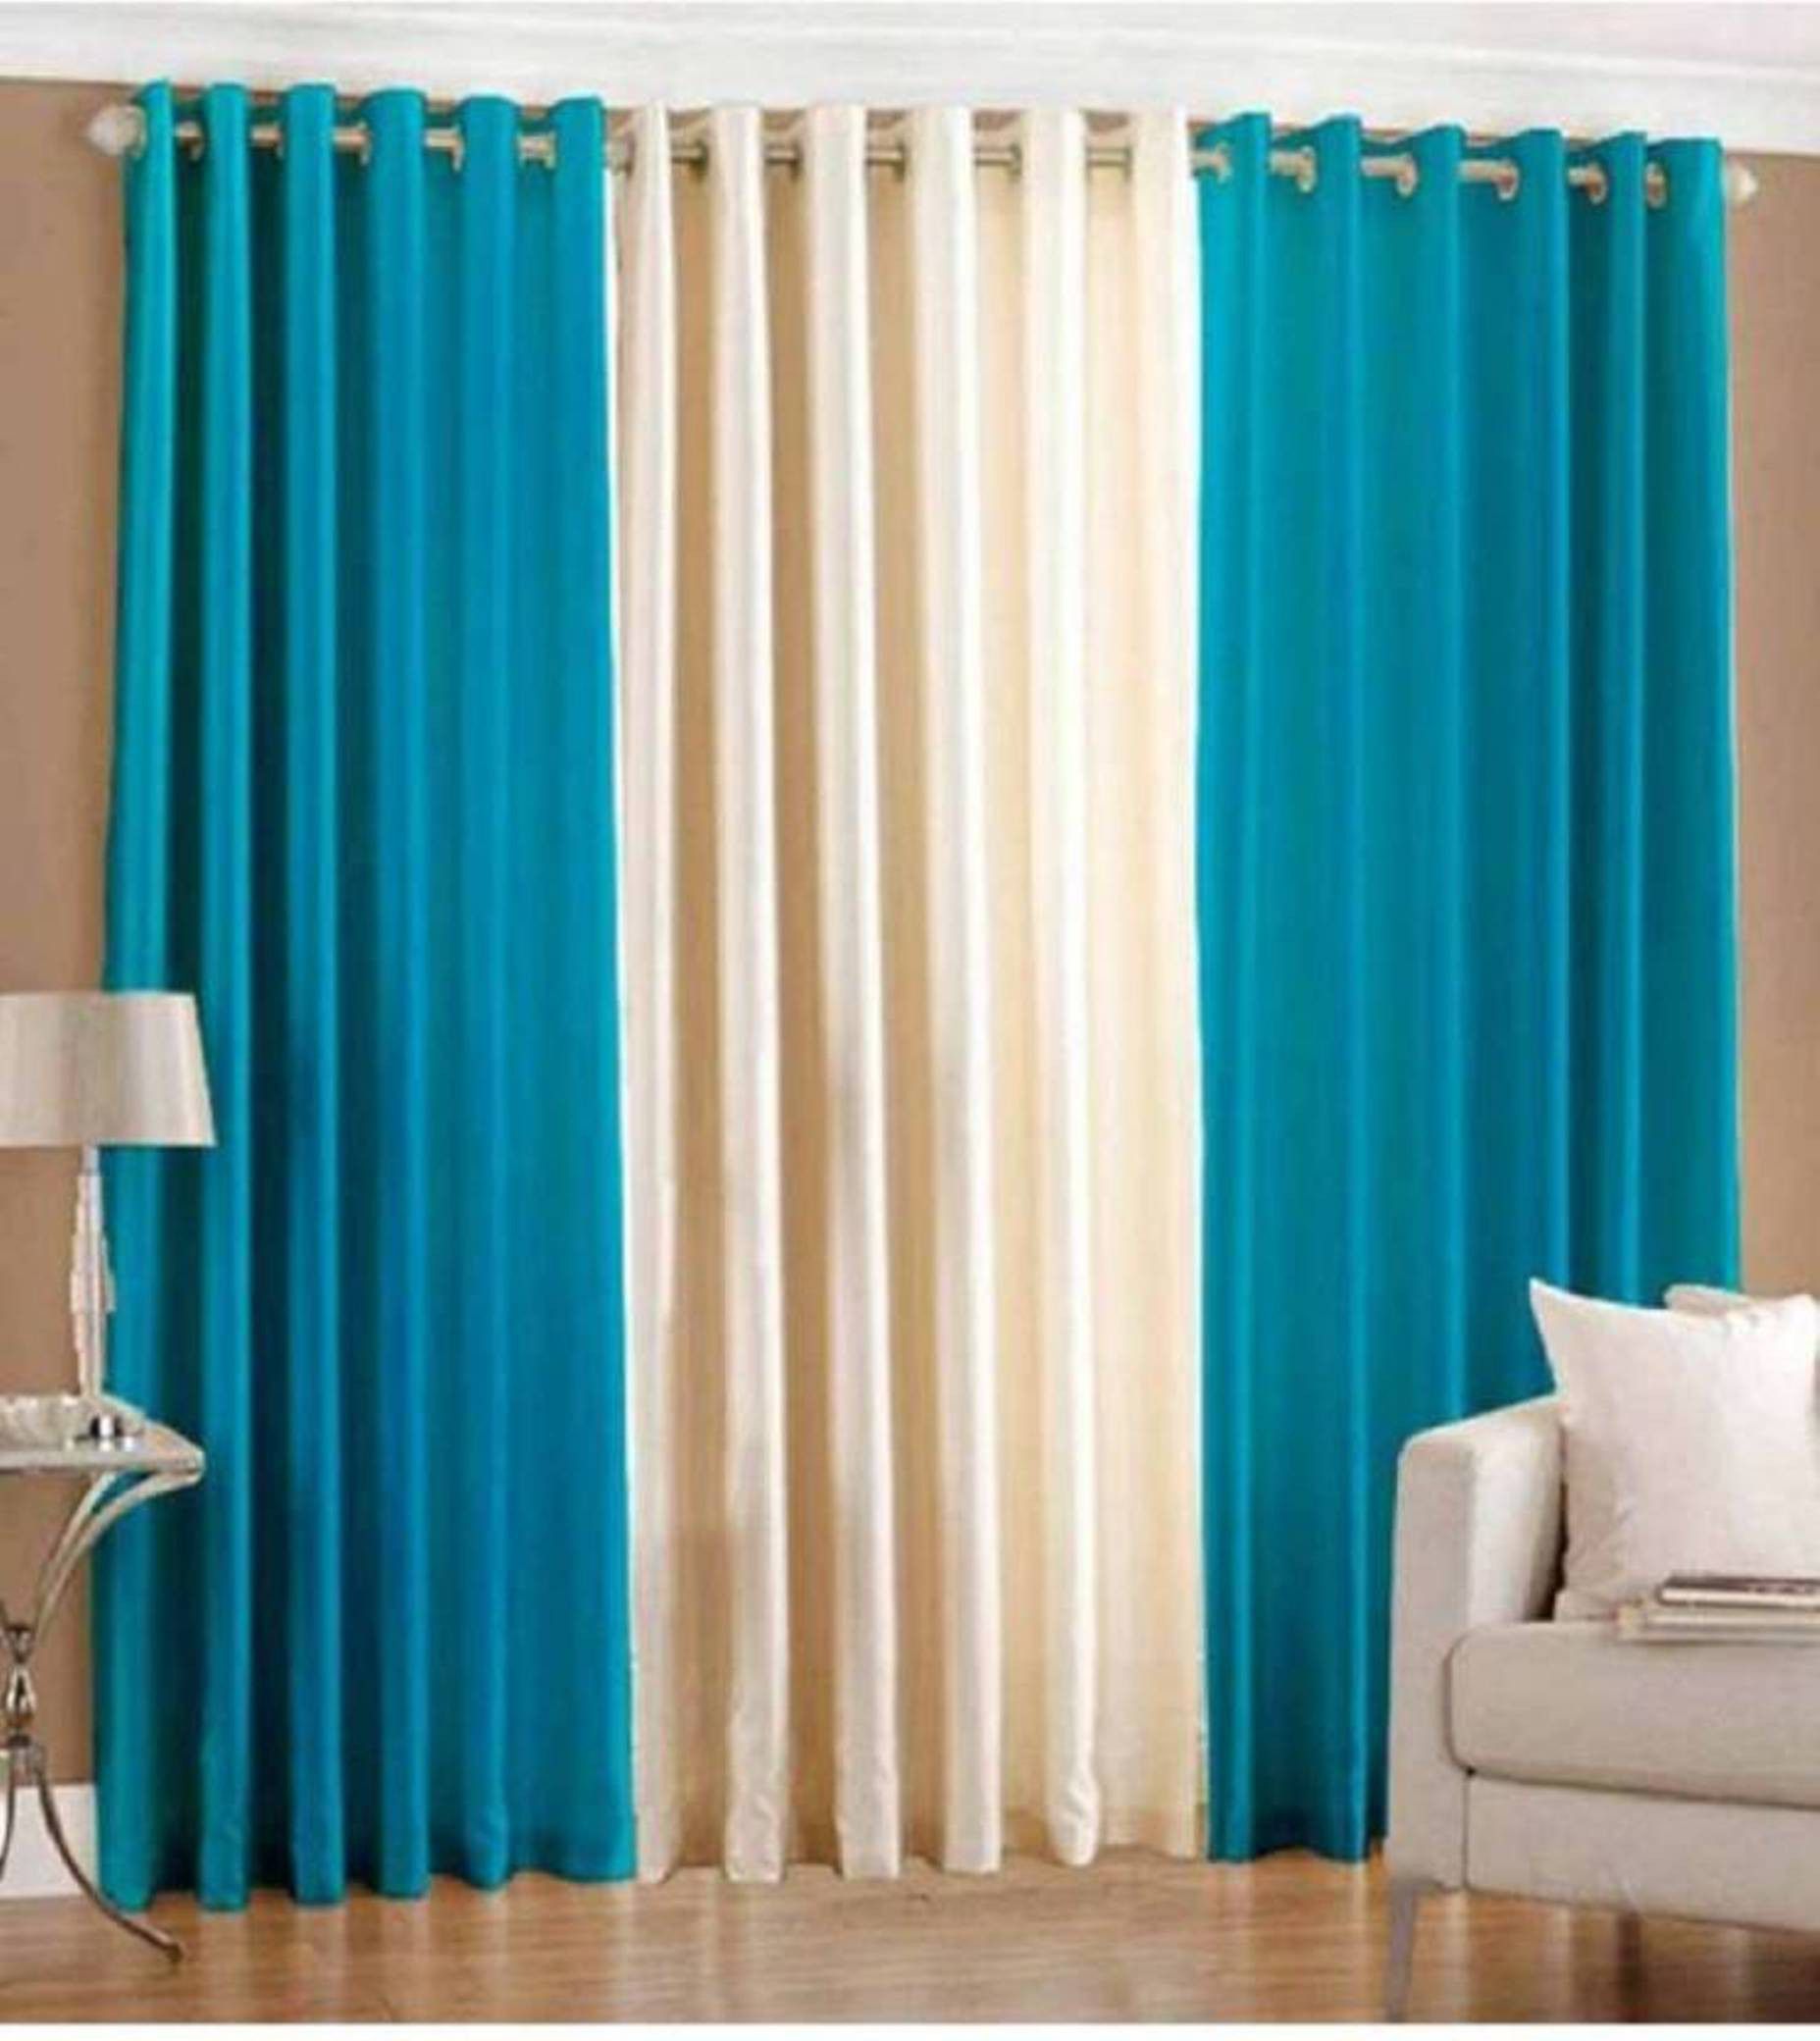     			N2C Home Floral Semi-Transparent Eyelet Curtain 5 ft ( Pack of 3 ) - Teal